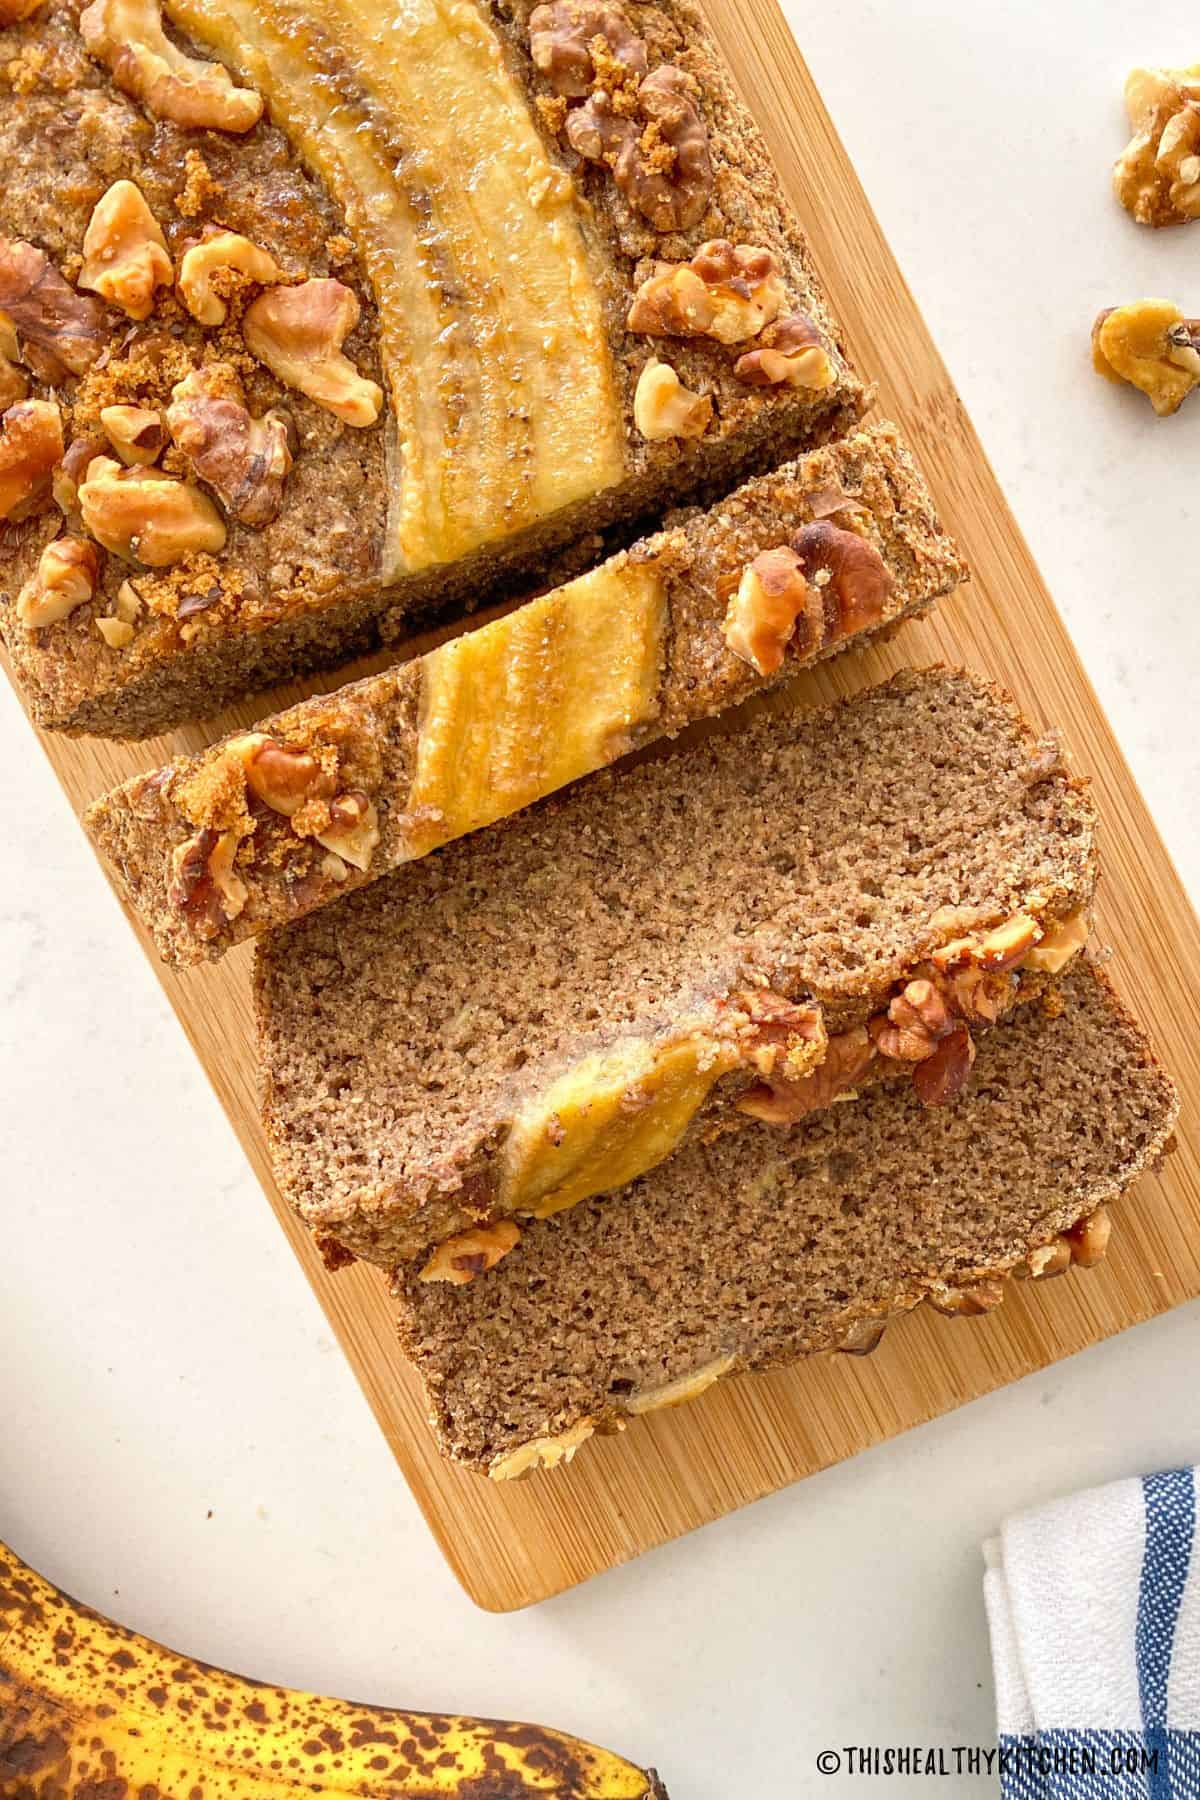 Banana bread with walnuts on top sliced on cutting board.